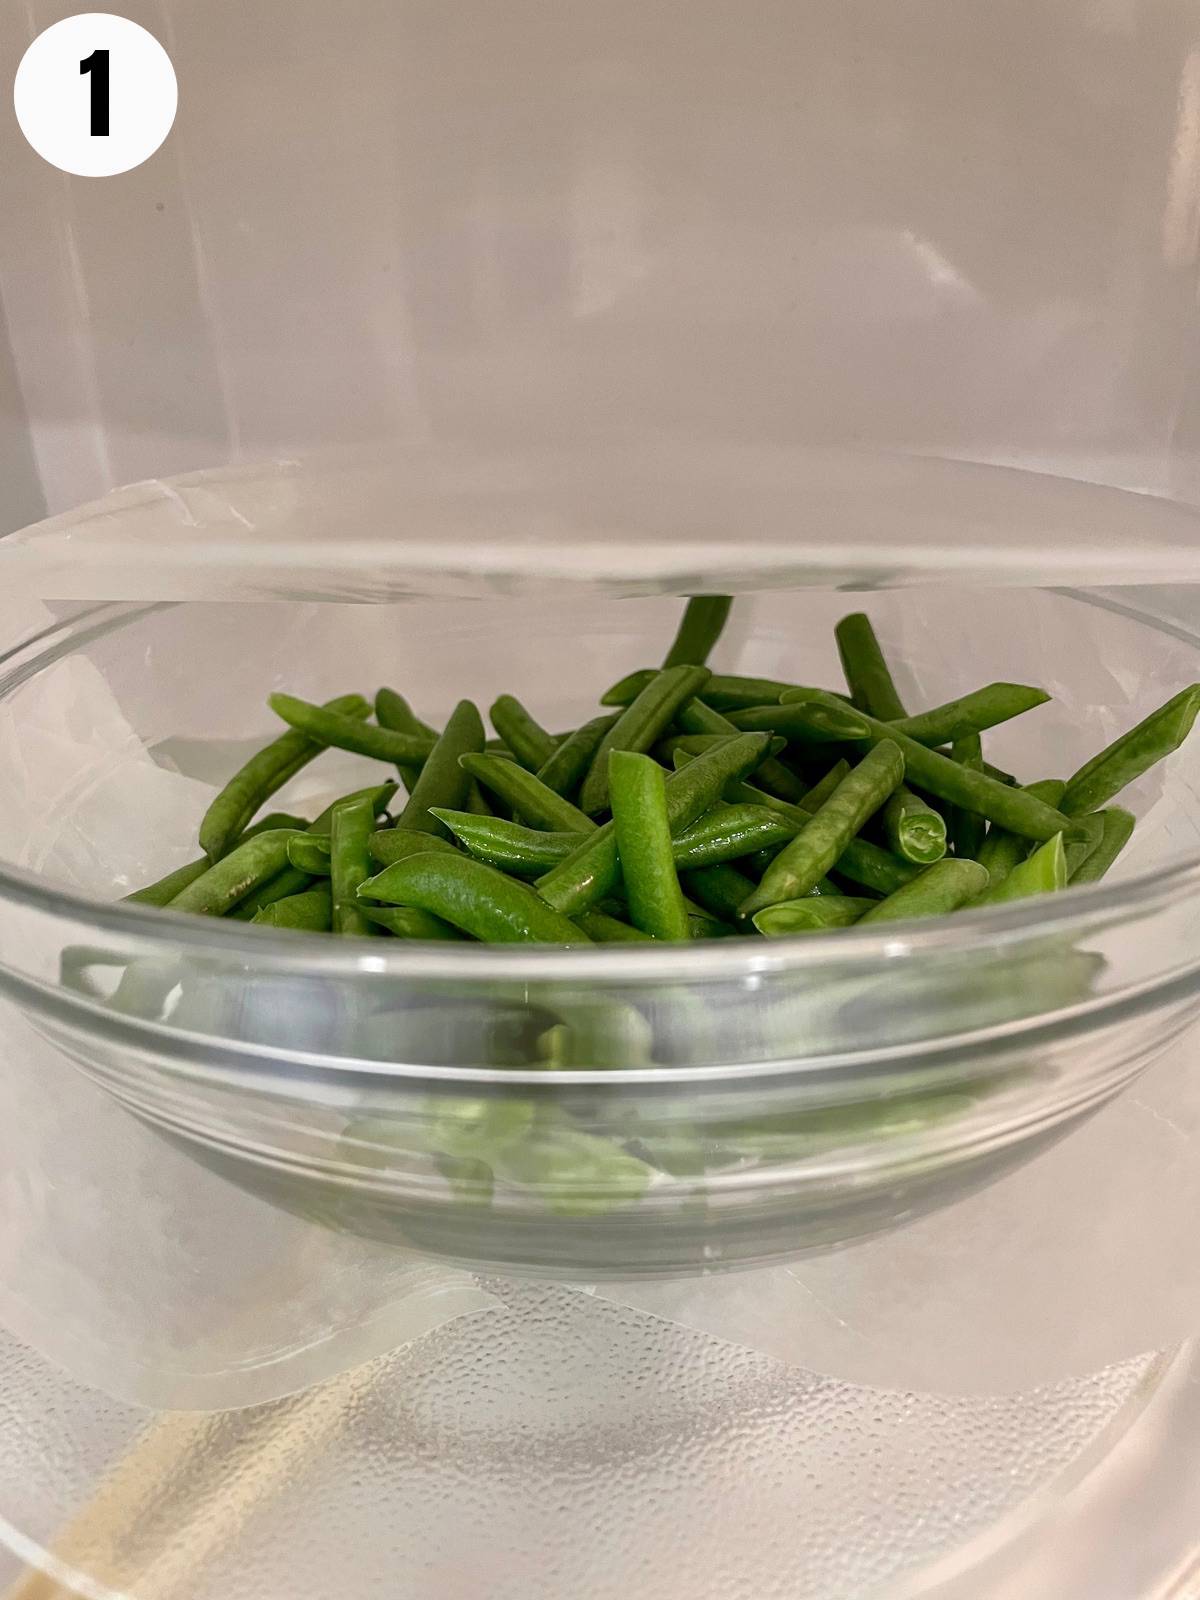 Green beans in a glass bowl in a microwave.